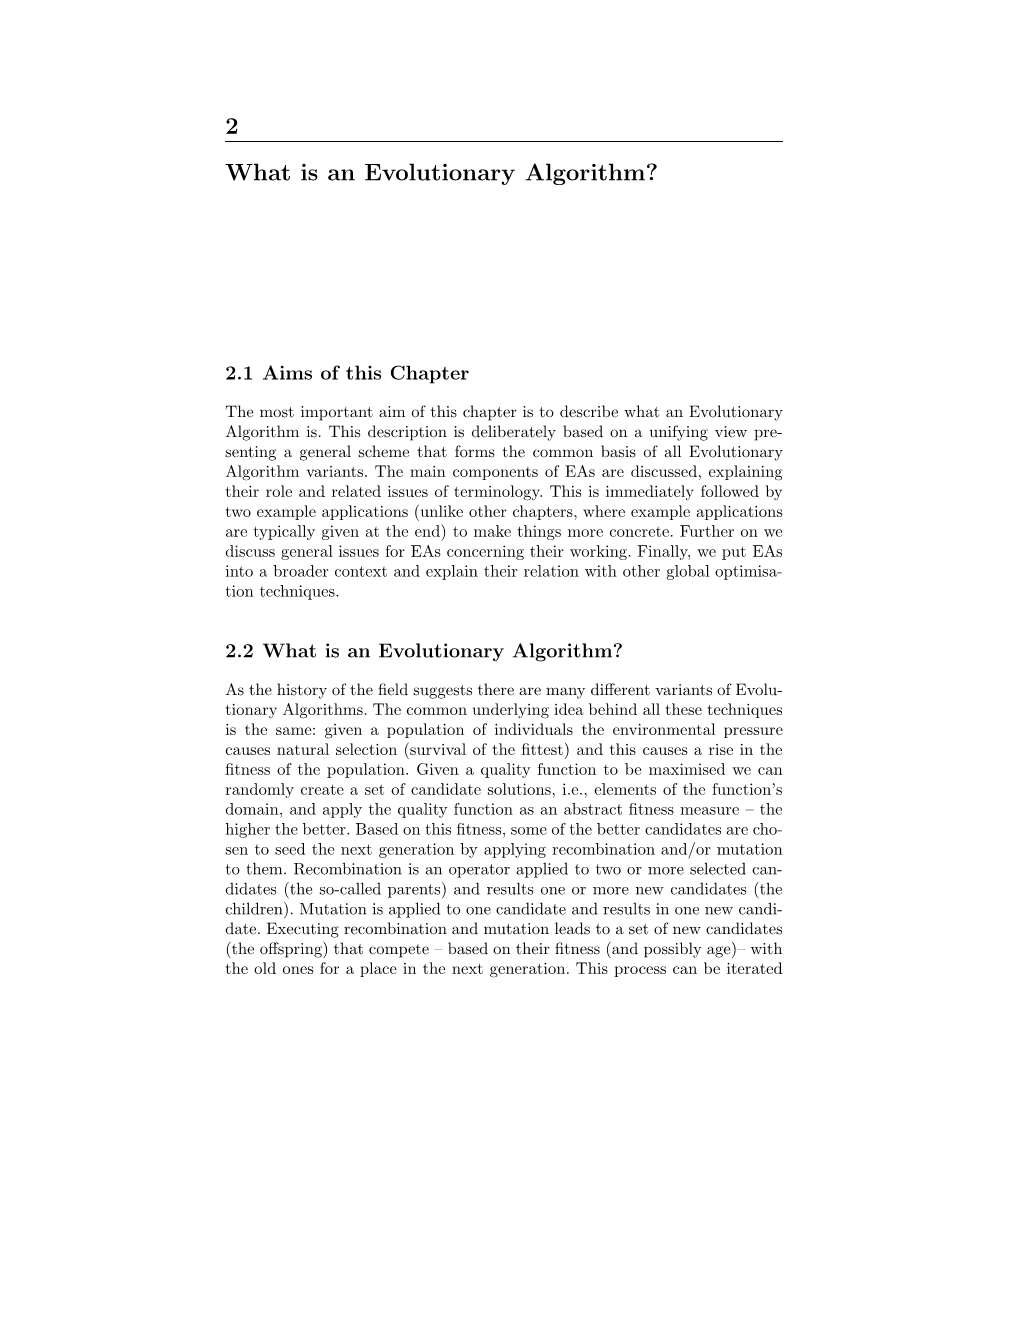 2 What Is an Evolutionary Algorithm?